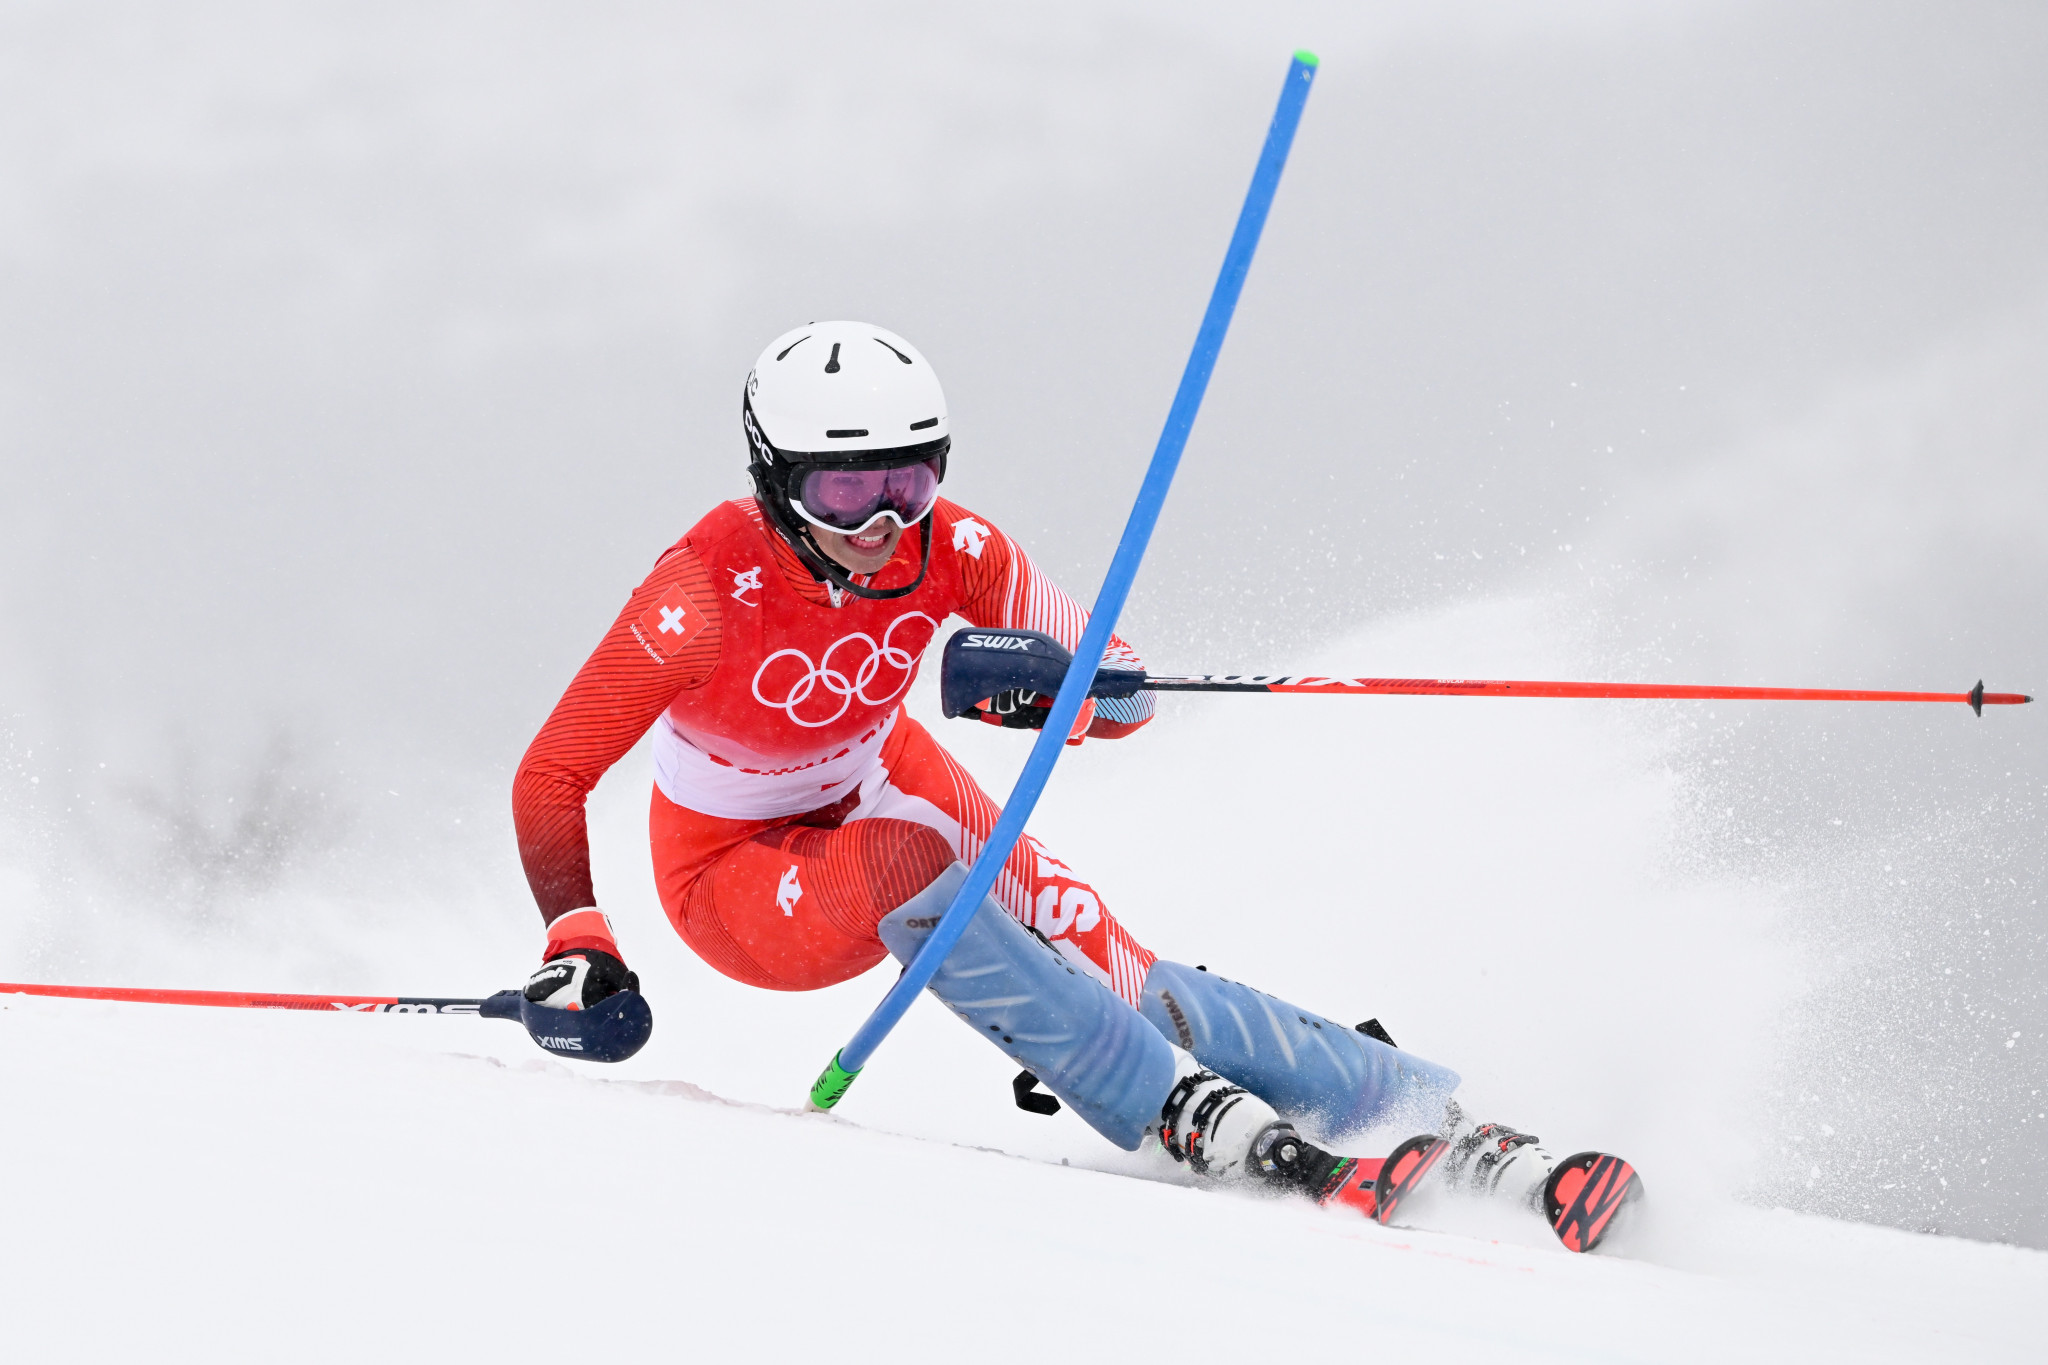 Switzerland’s Michelle Gisin was crowned women's Alpine combined champion at Beijing 2022 after registering the fastest aggregate time following the completion of the downhill and slalom runs ©Getty Images